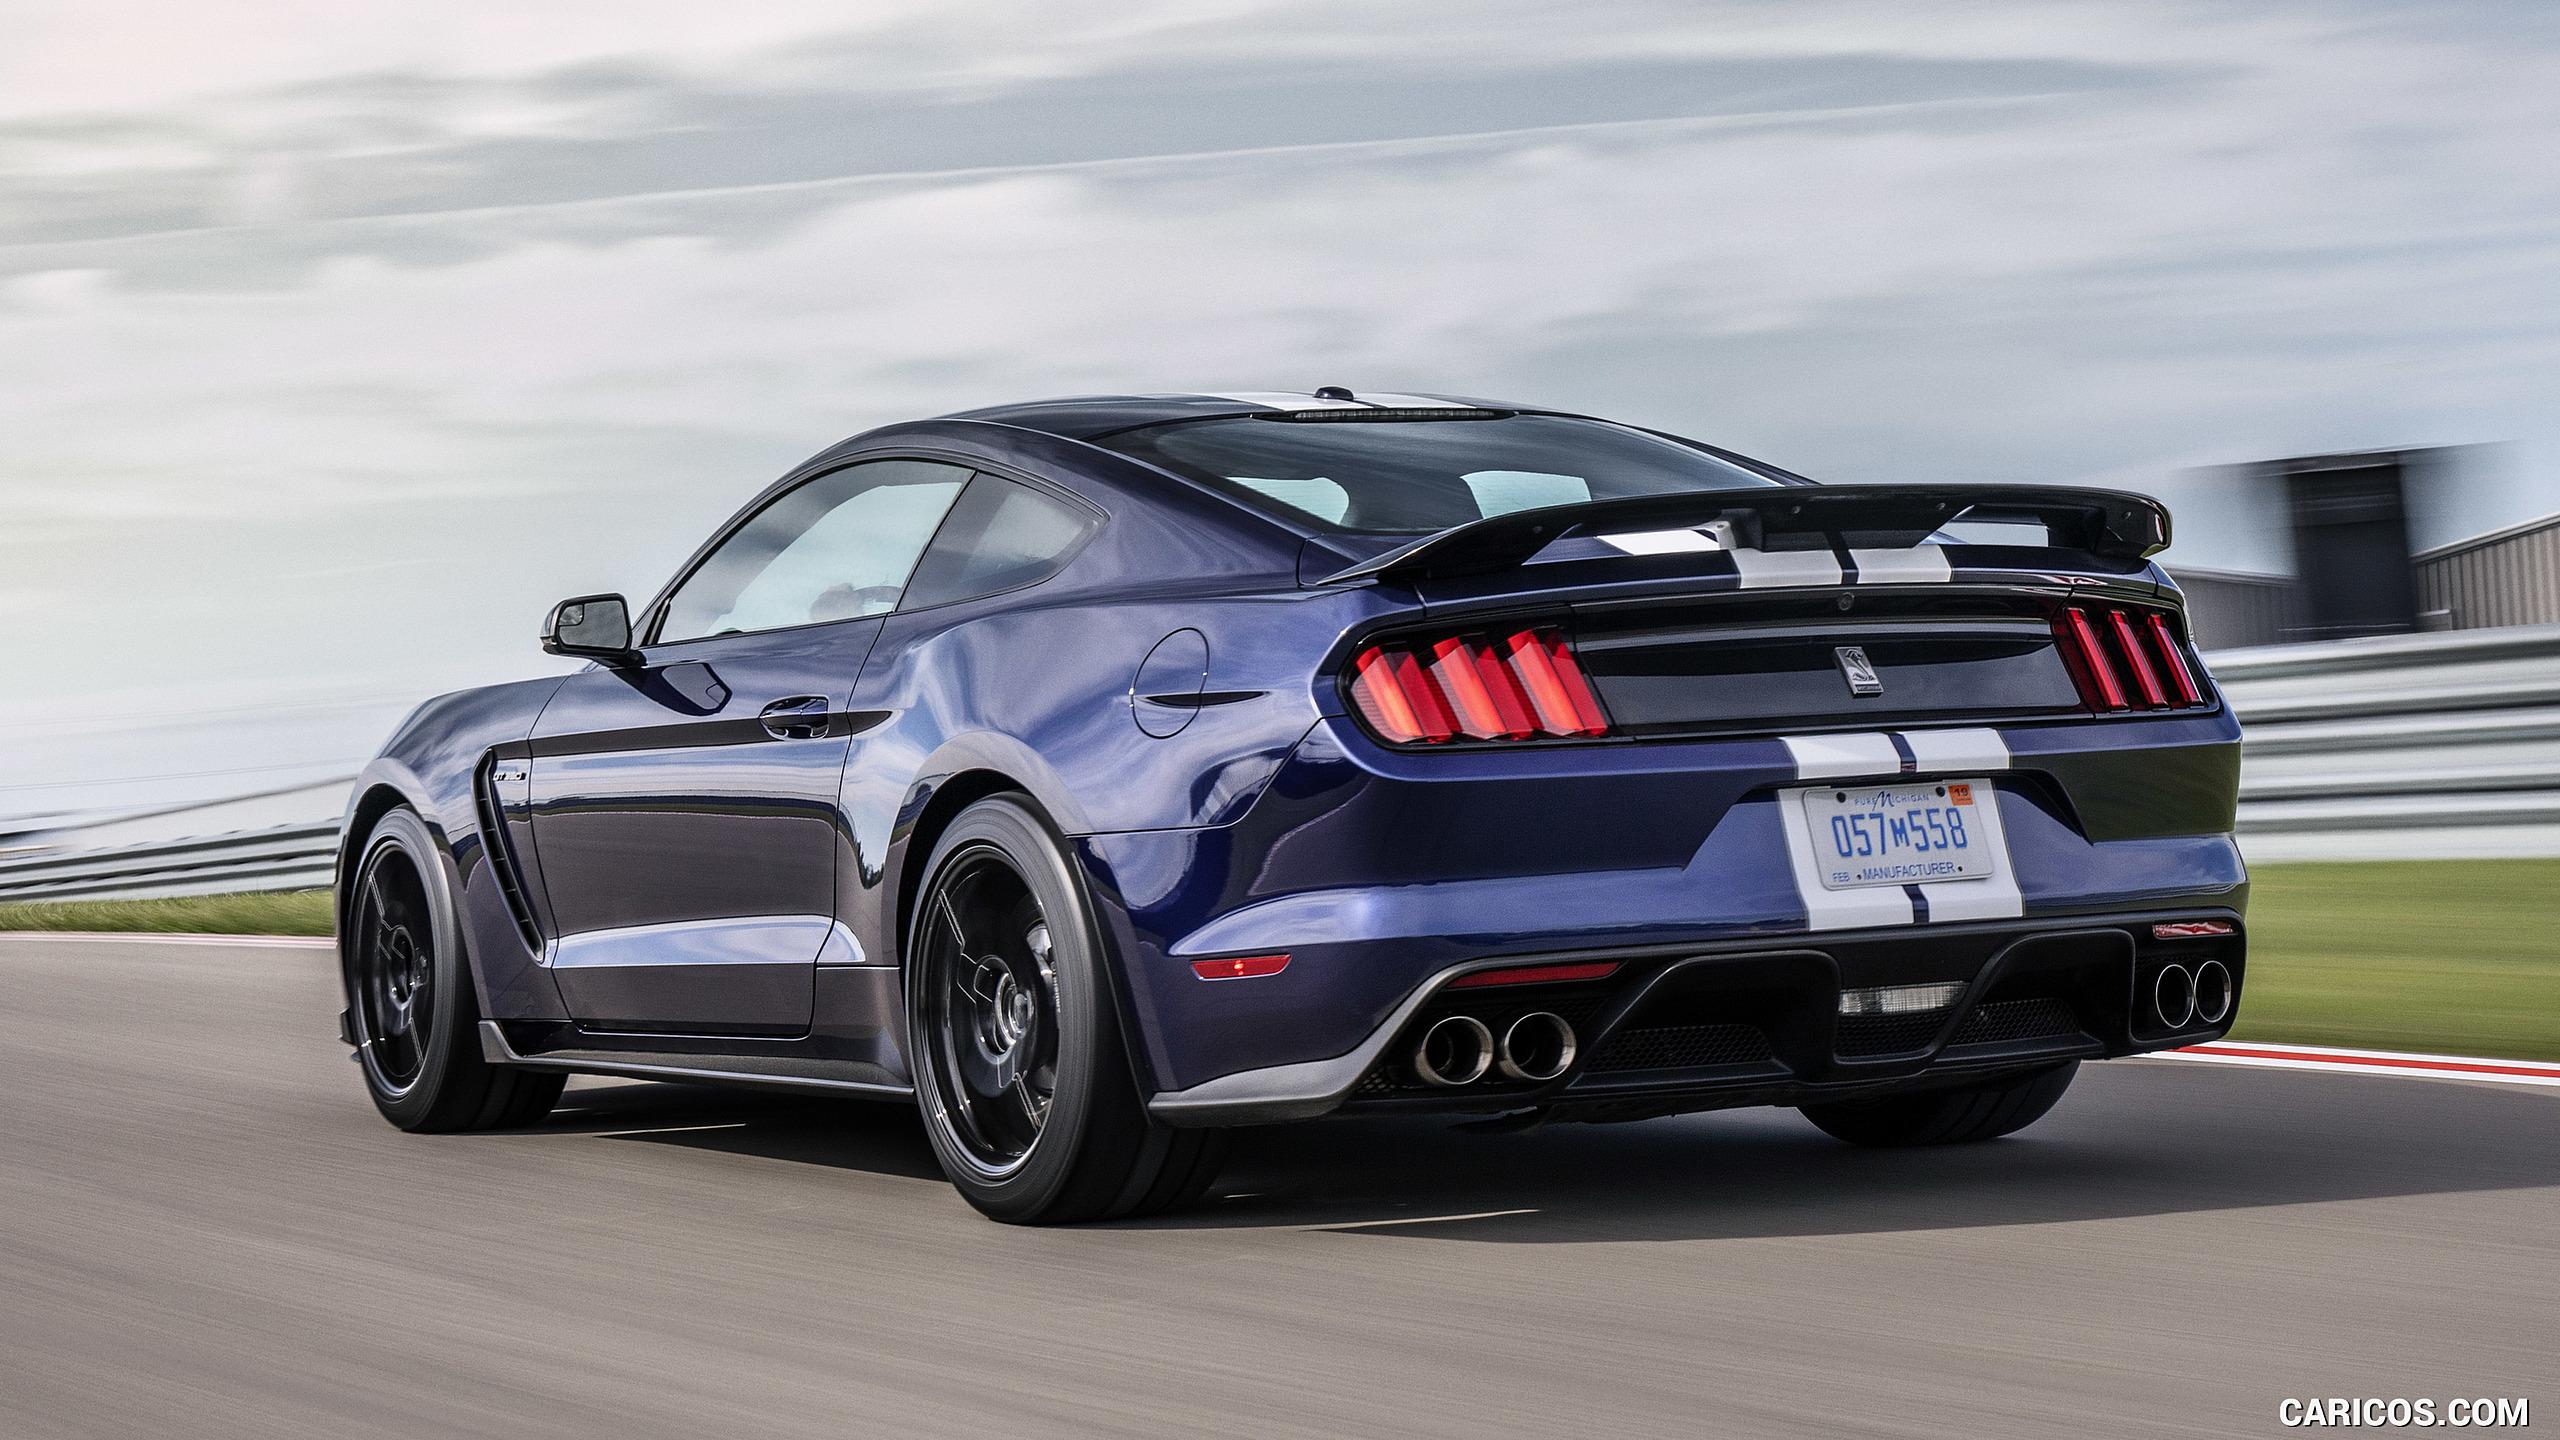 Free download 2019 Ford Mustang Shelby GT350 Rear Three